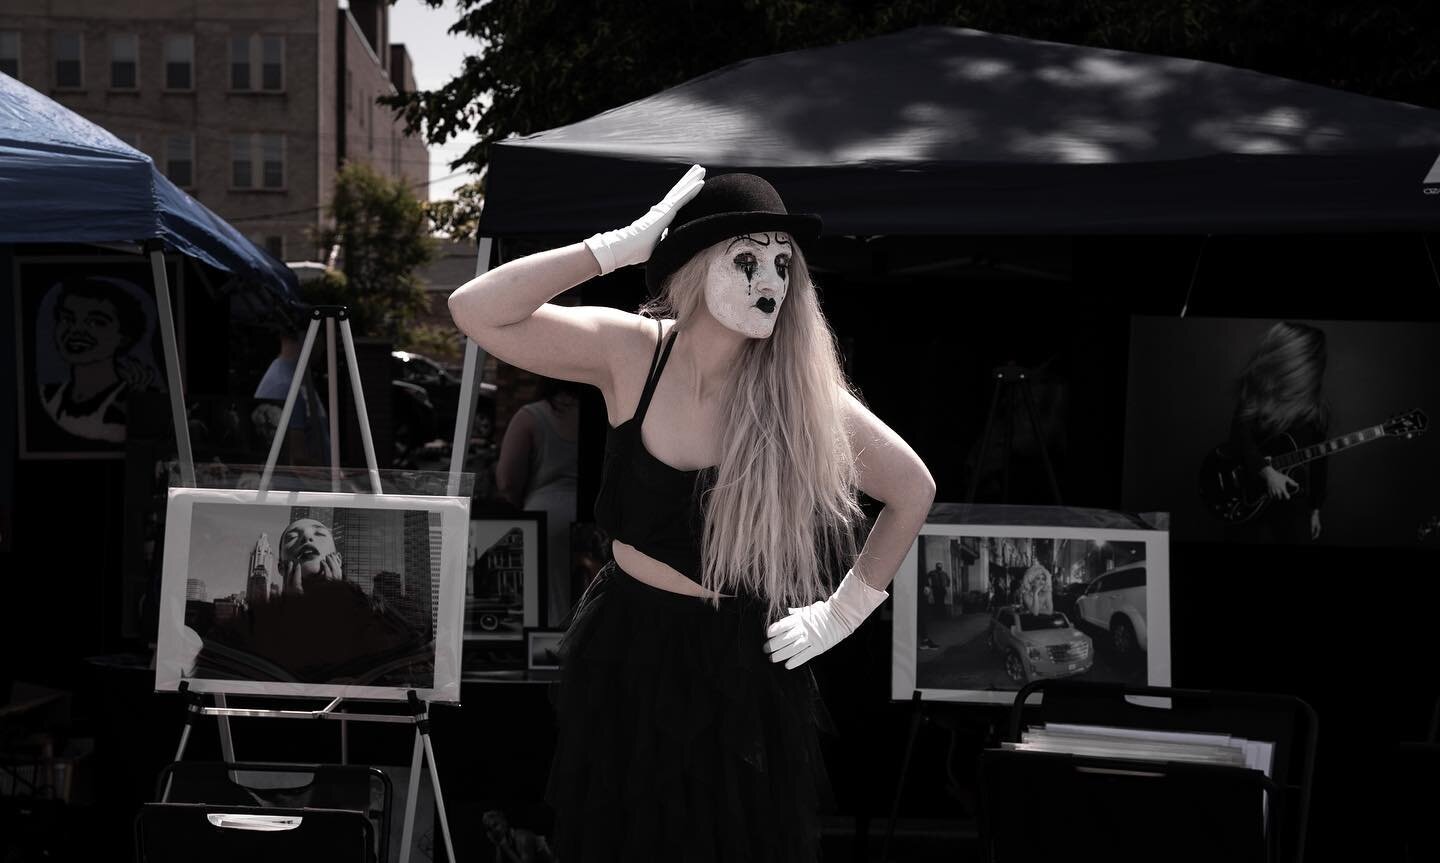 More Mime at the Allentown Art Festival. Such a cool idea to have at one of the tents.